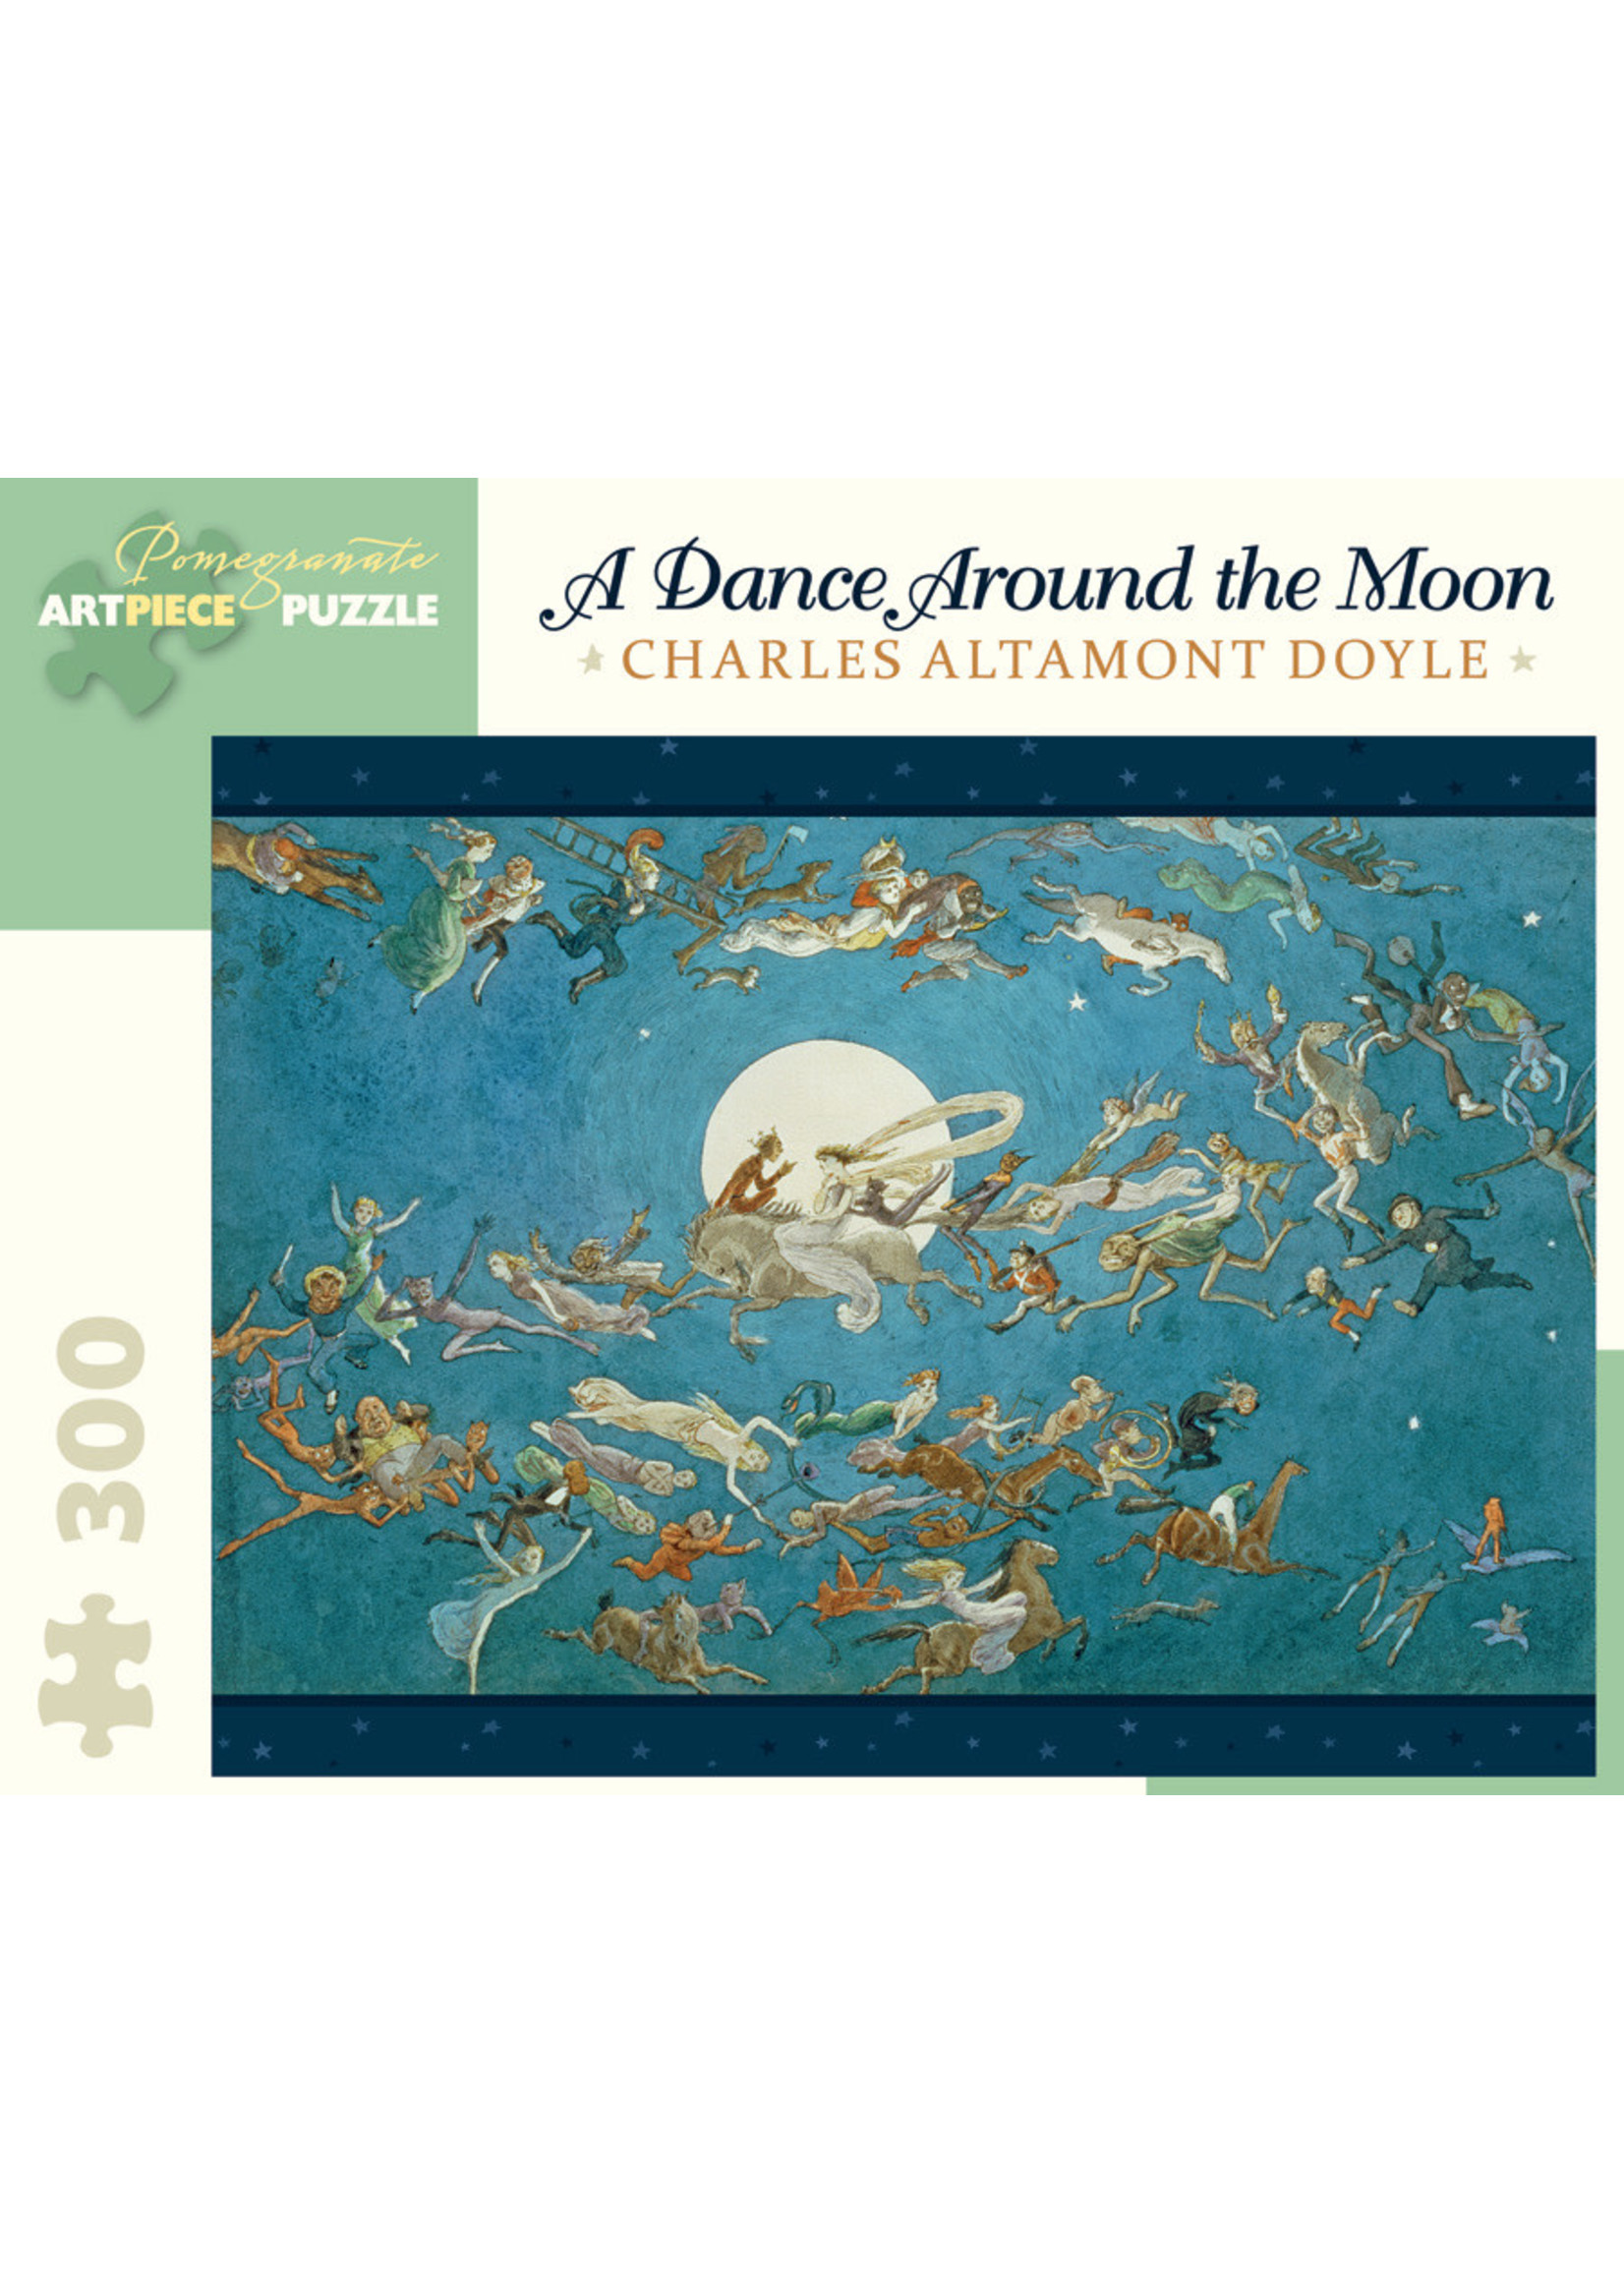 Pomegranate "A Dance Around the Moon" 300 Piece Puzzle